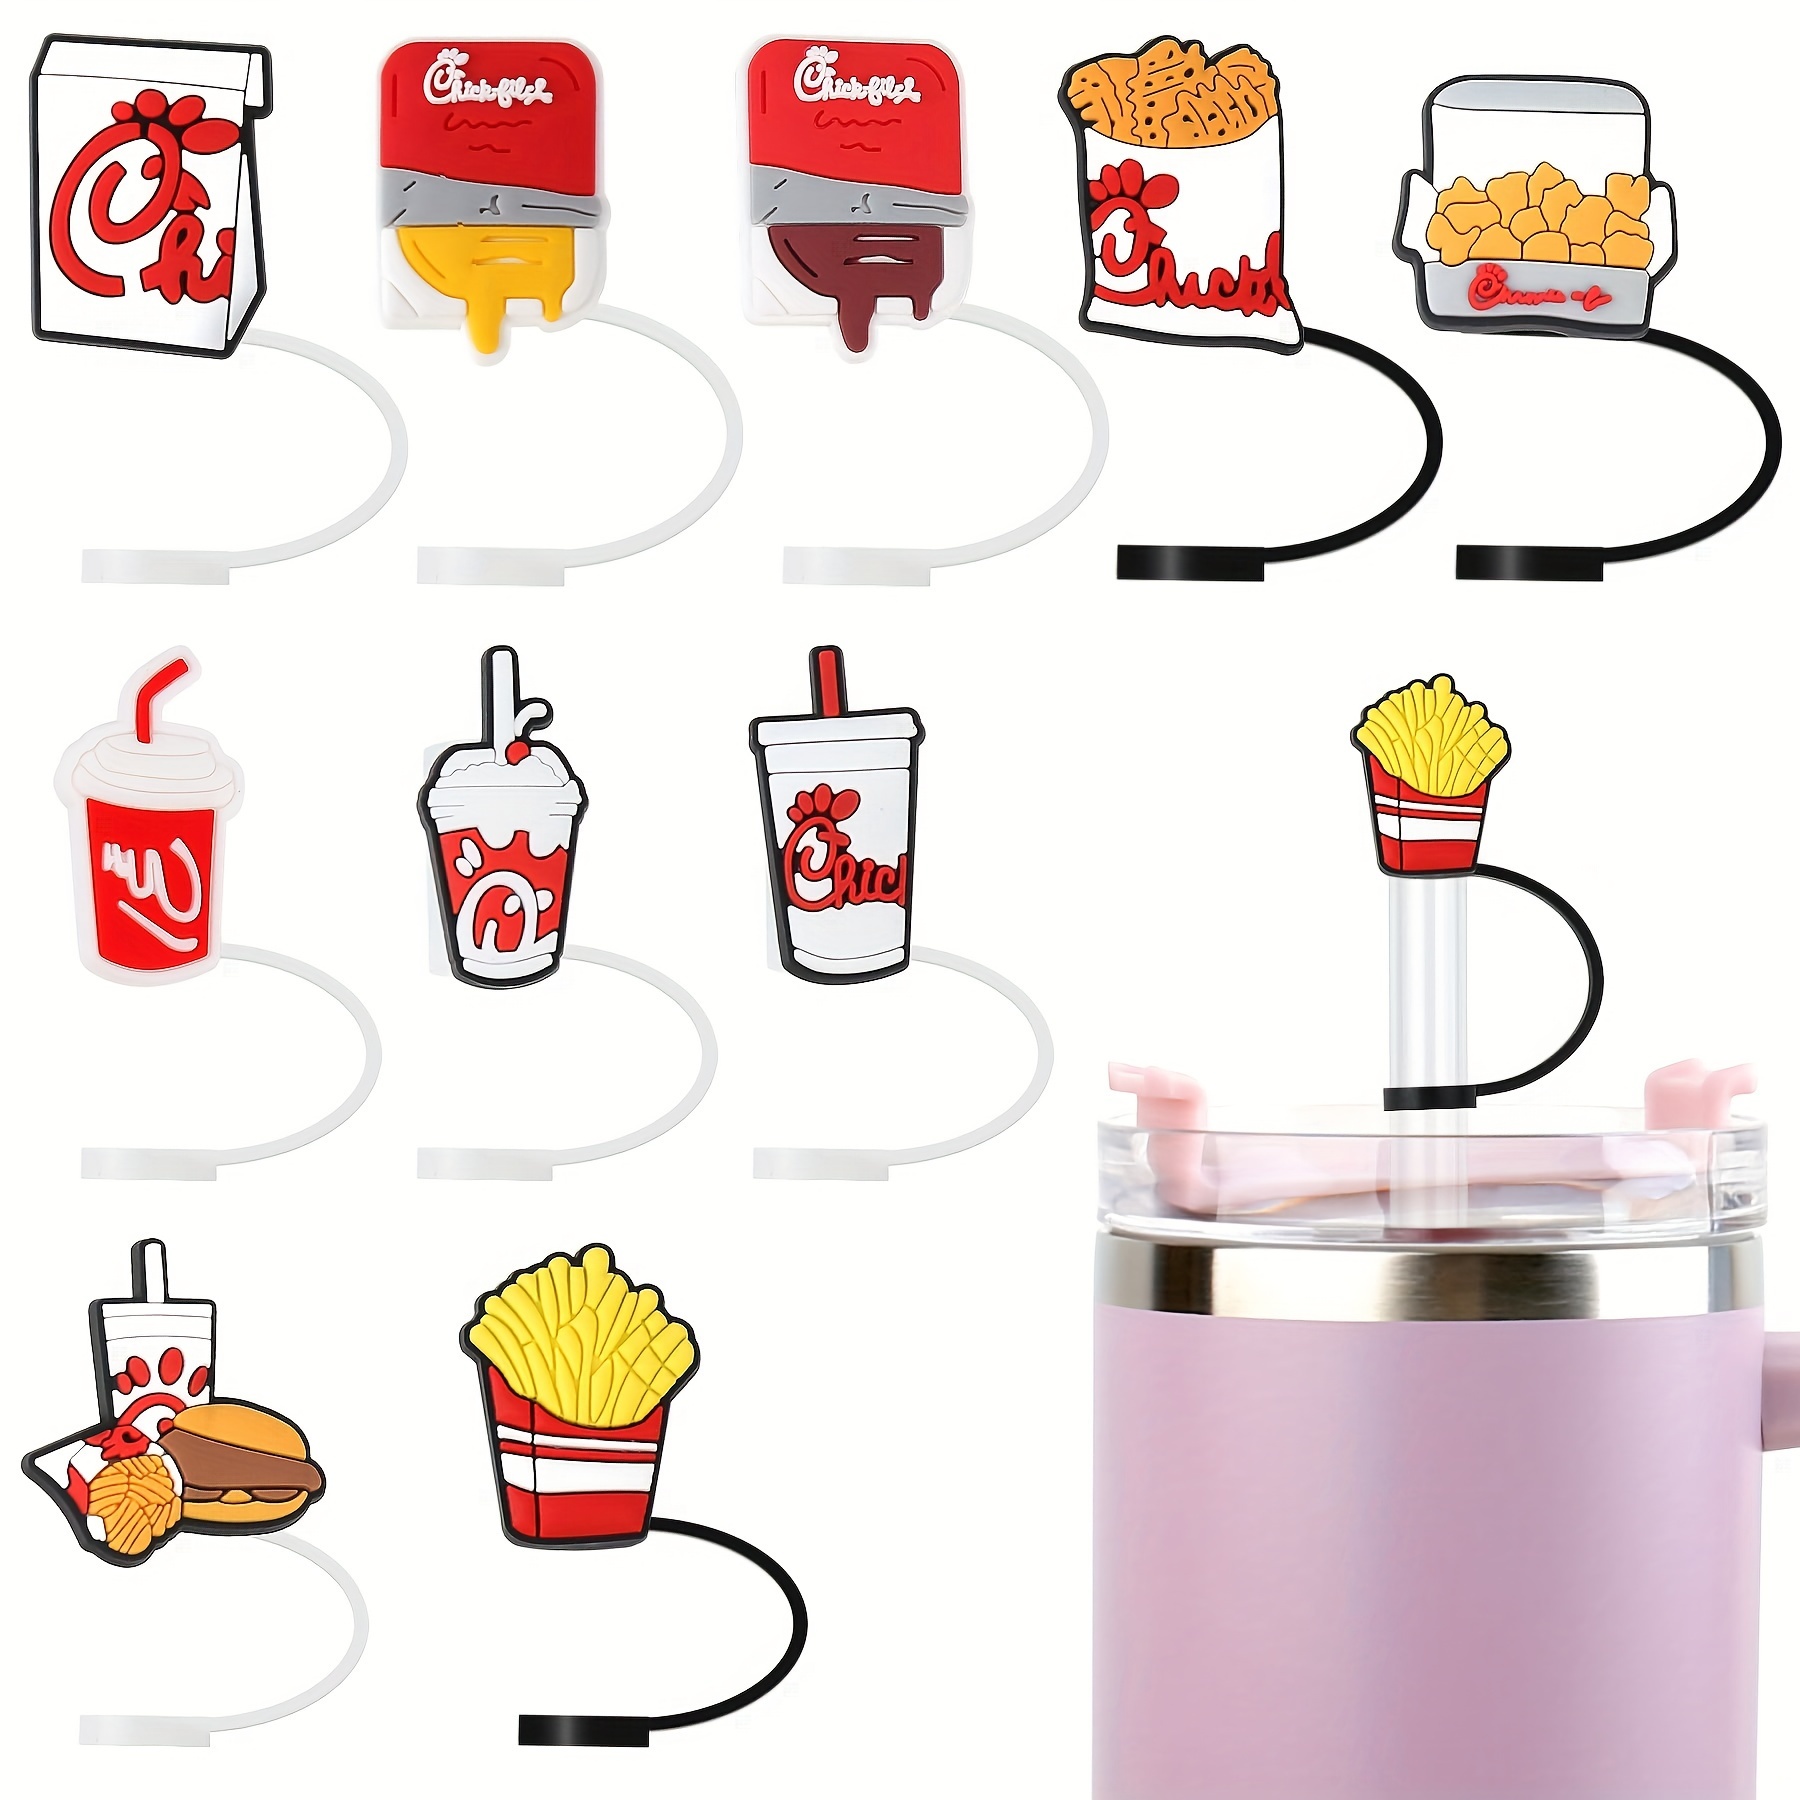 

Set, Straw Cover For Stanley 30&40 Oz Tumbler Fast Food Theme Straw Covers Reusable Drinking Straw Cap Lids Cap For 10mm Straw Dustproof Straw Plug For 8-10mm Straws Gifts For Men Women